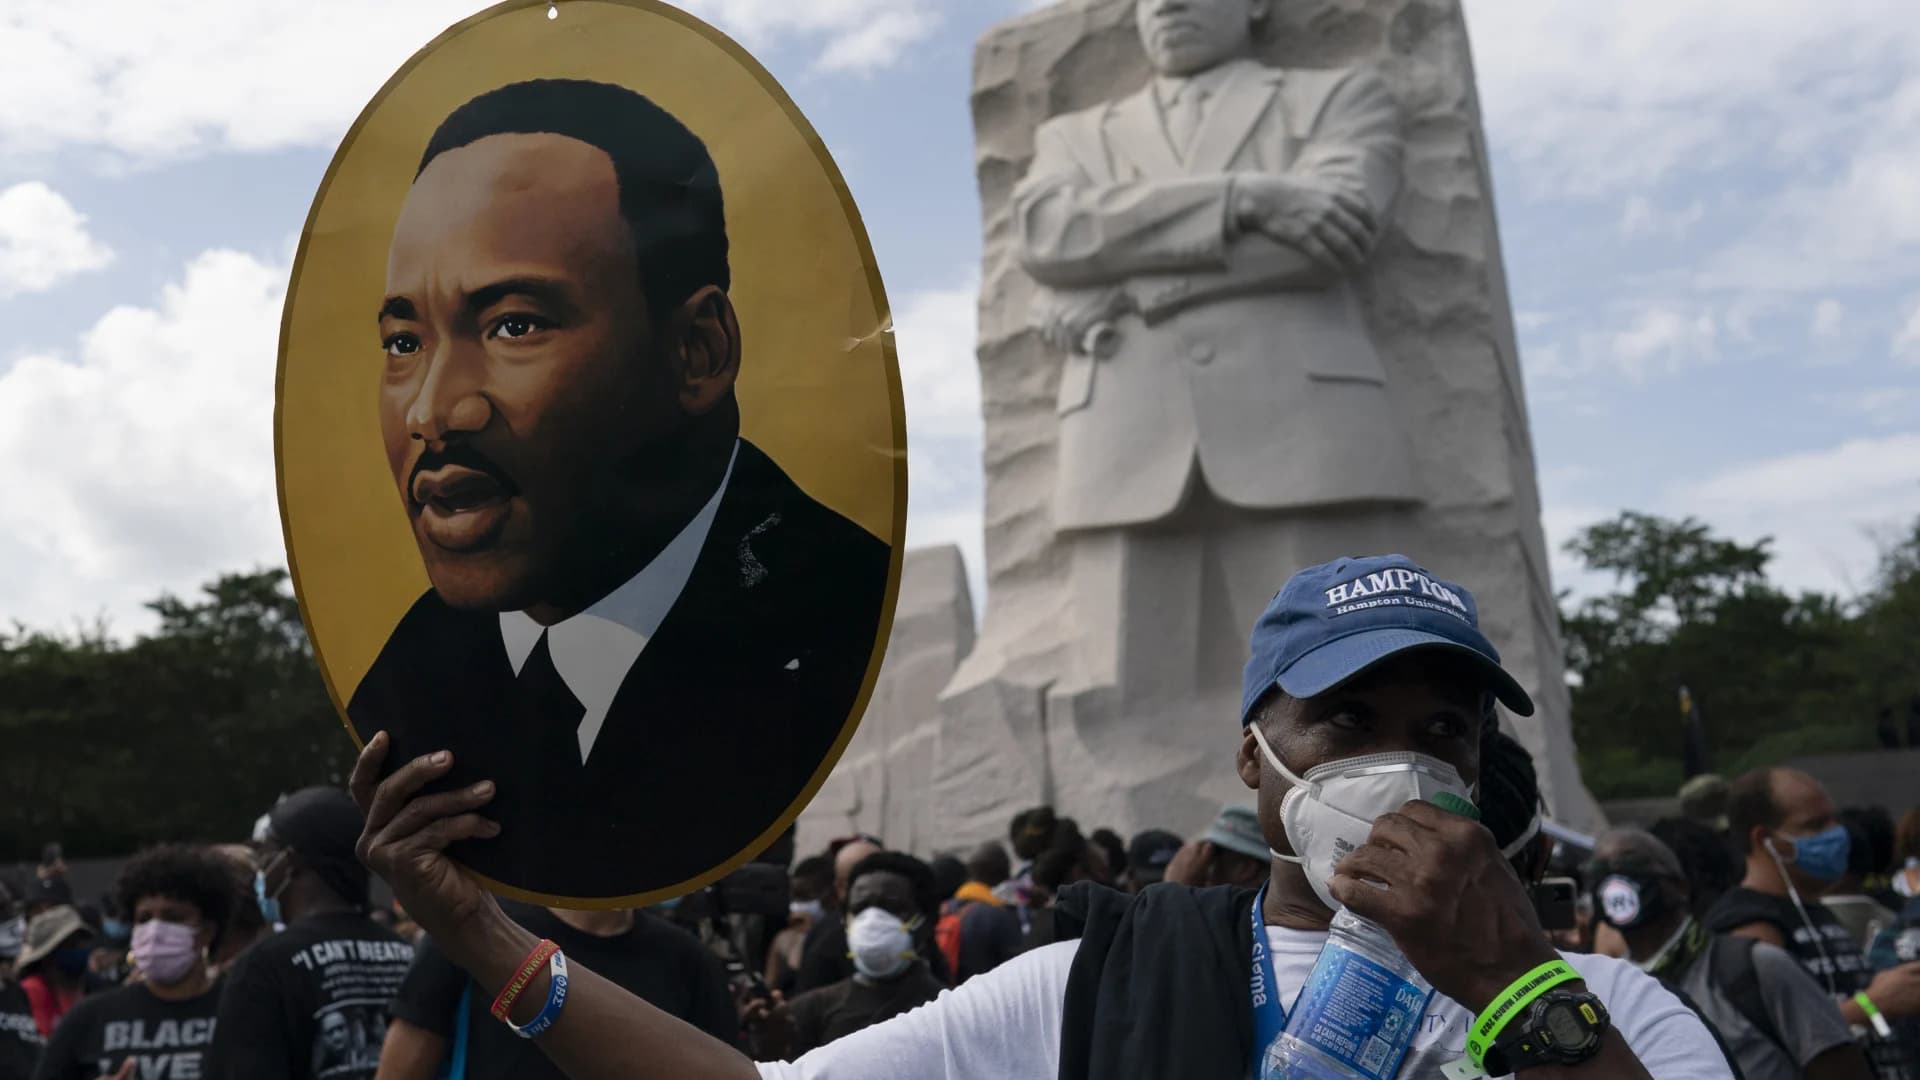 Celebrate Martin Luther King Jr. with a virtual visit to this DC memorial